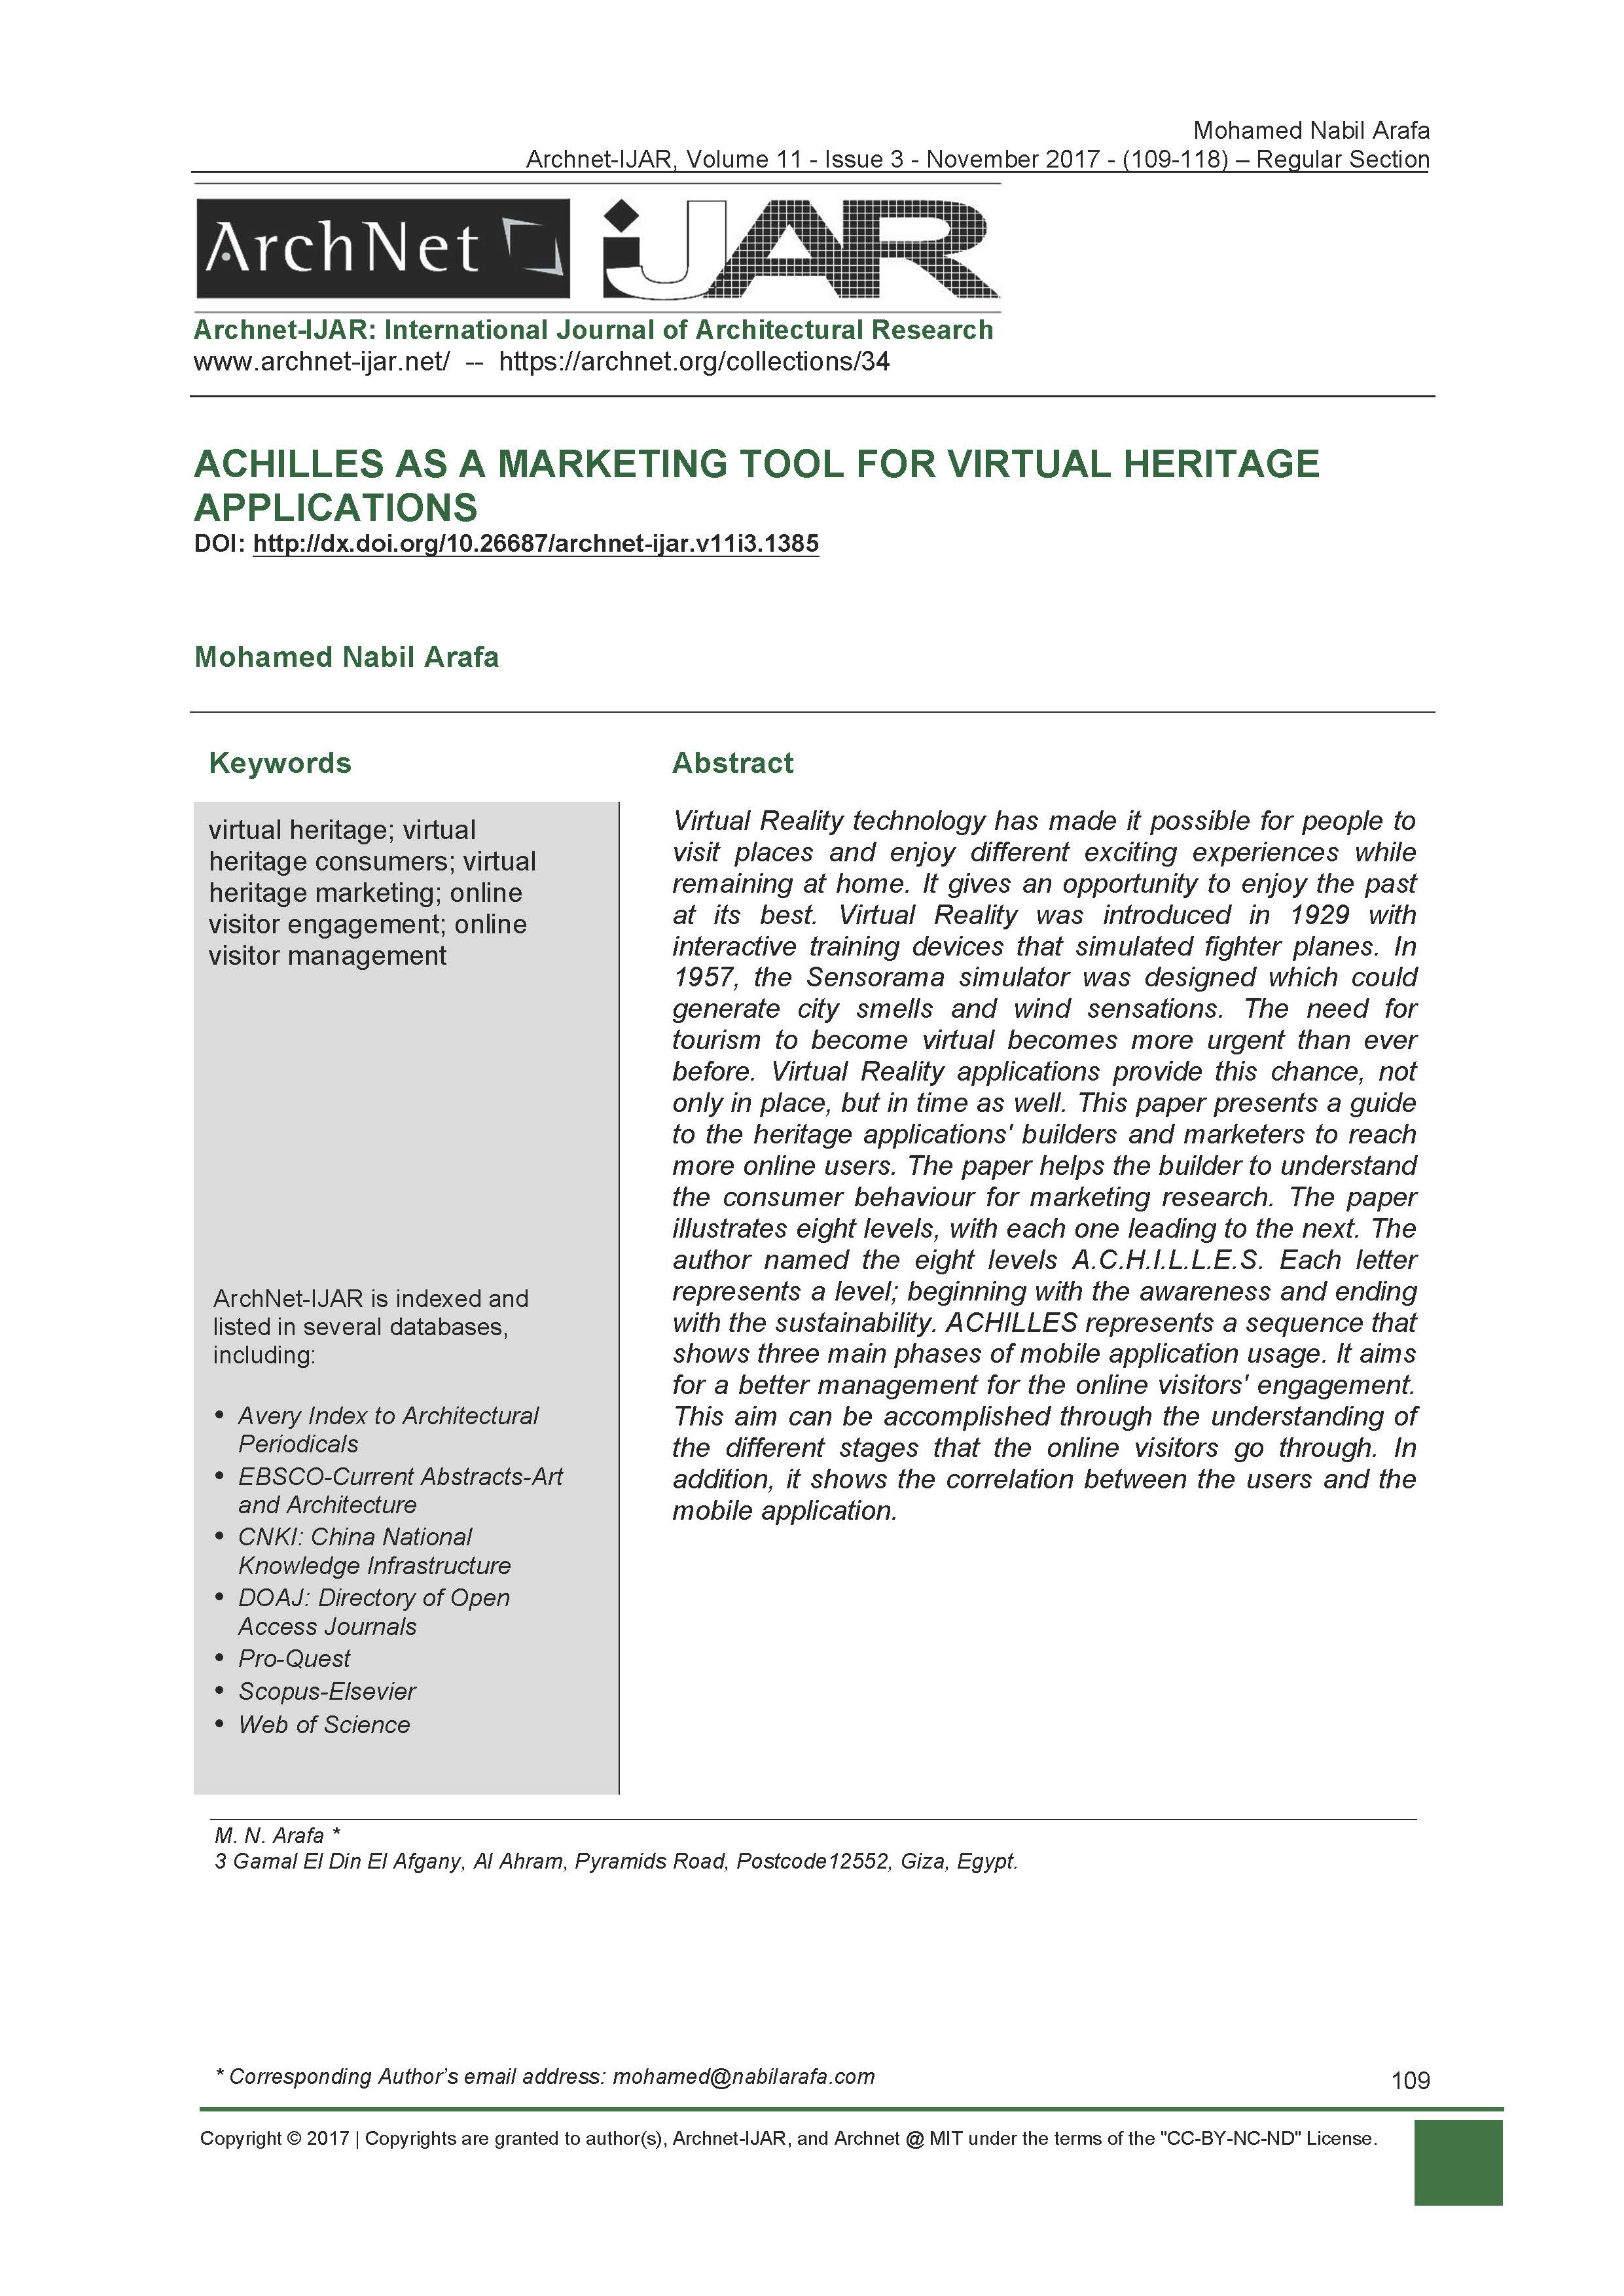 Achilles as a Marketing Tool for Virtual Heritage Applications